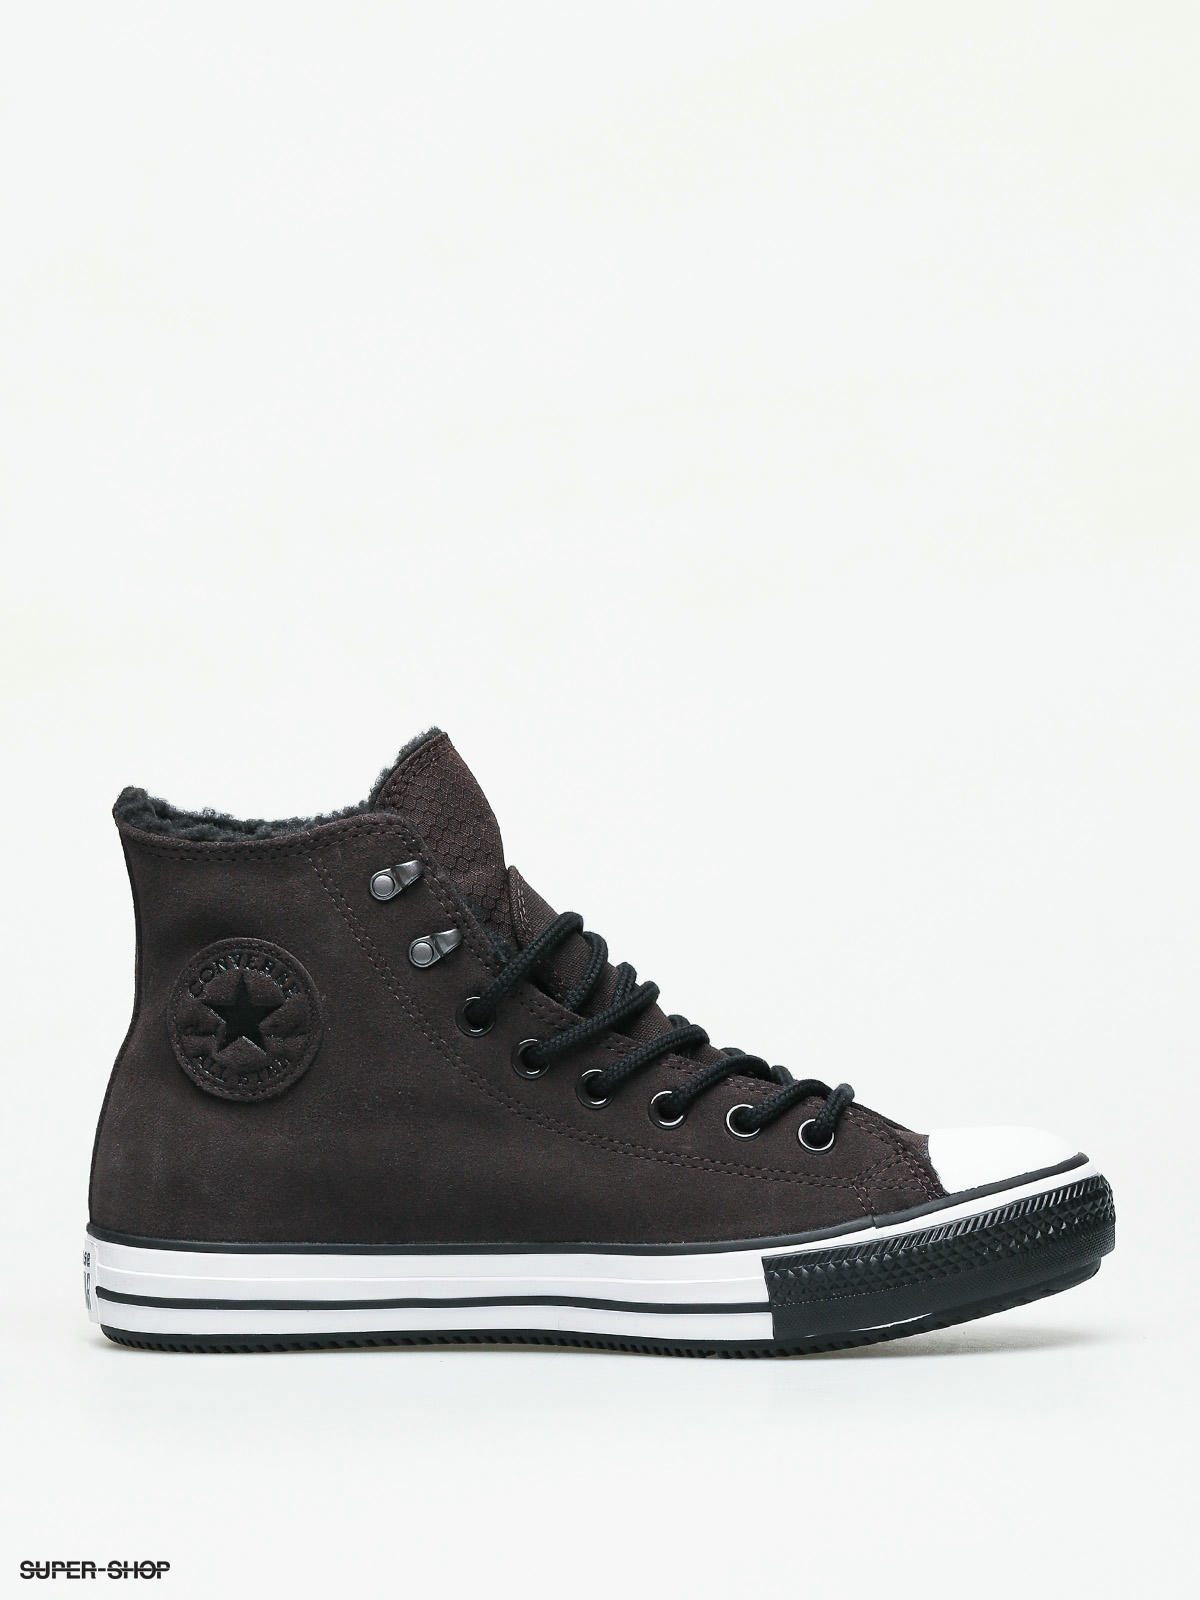 converse all star hi leather brown